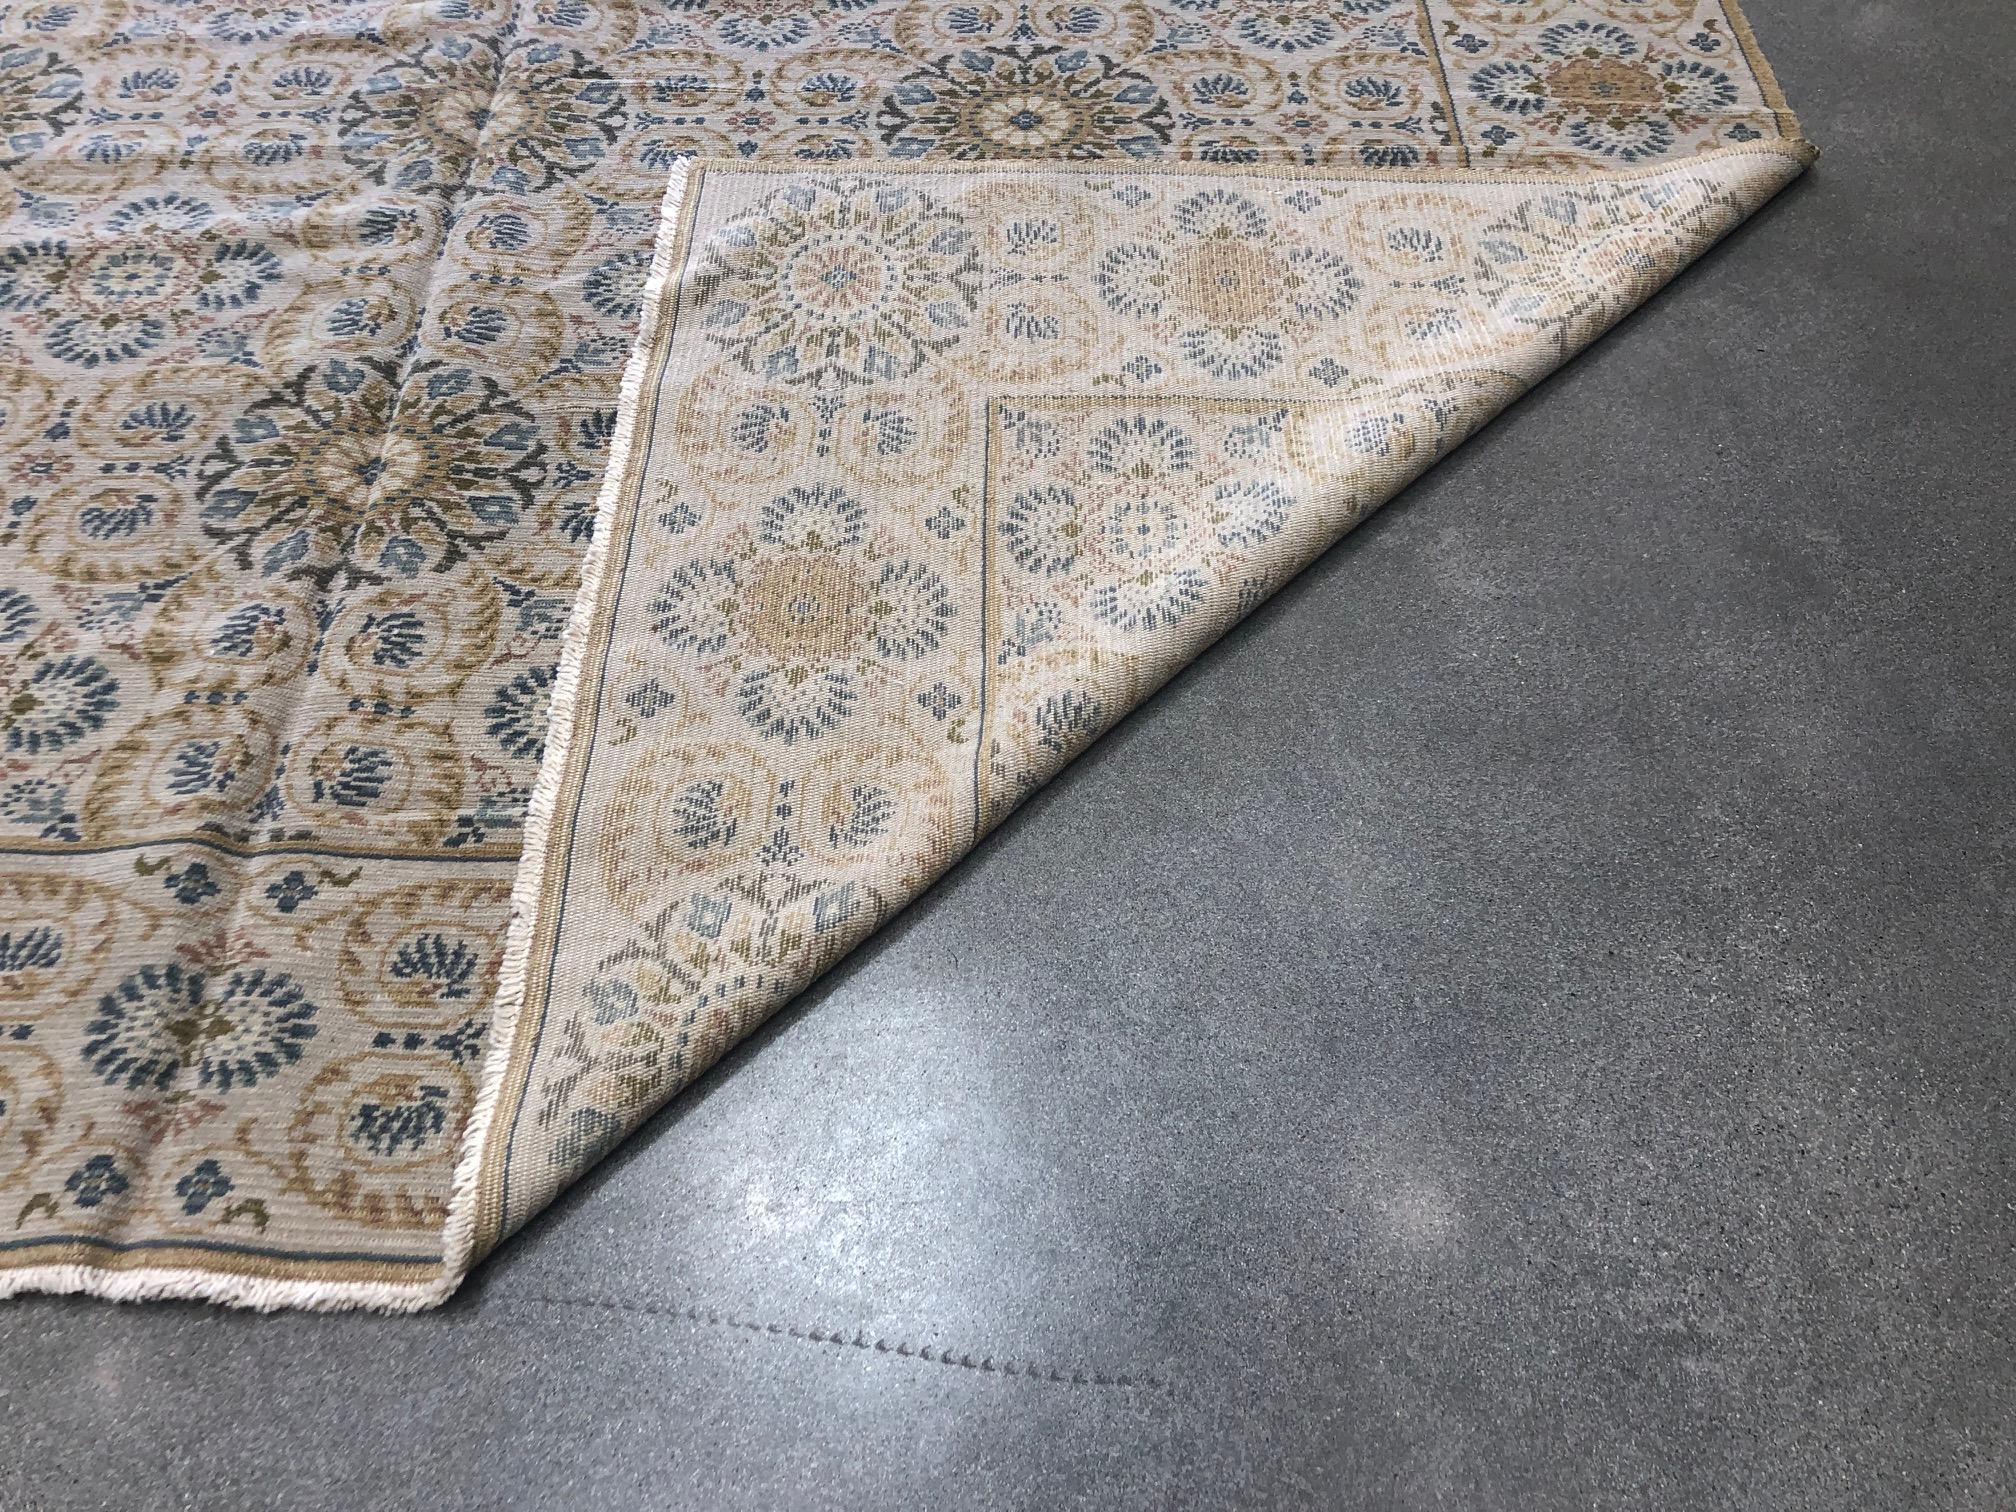 European Design Area Rug with Blue and Gold In Excellent Condition For Sale In Los Angeles, CA